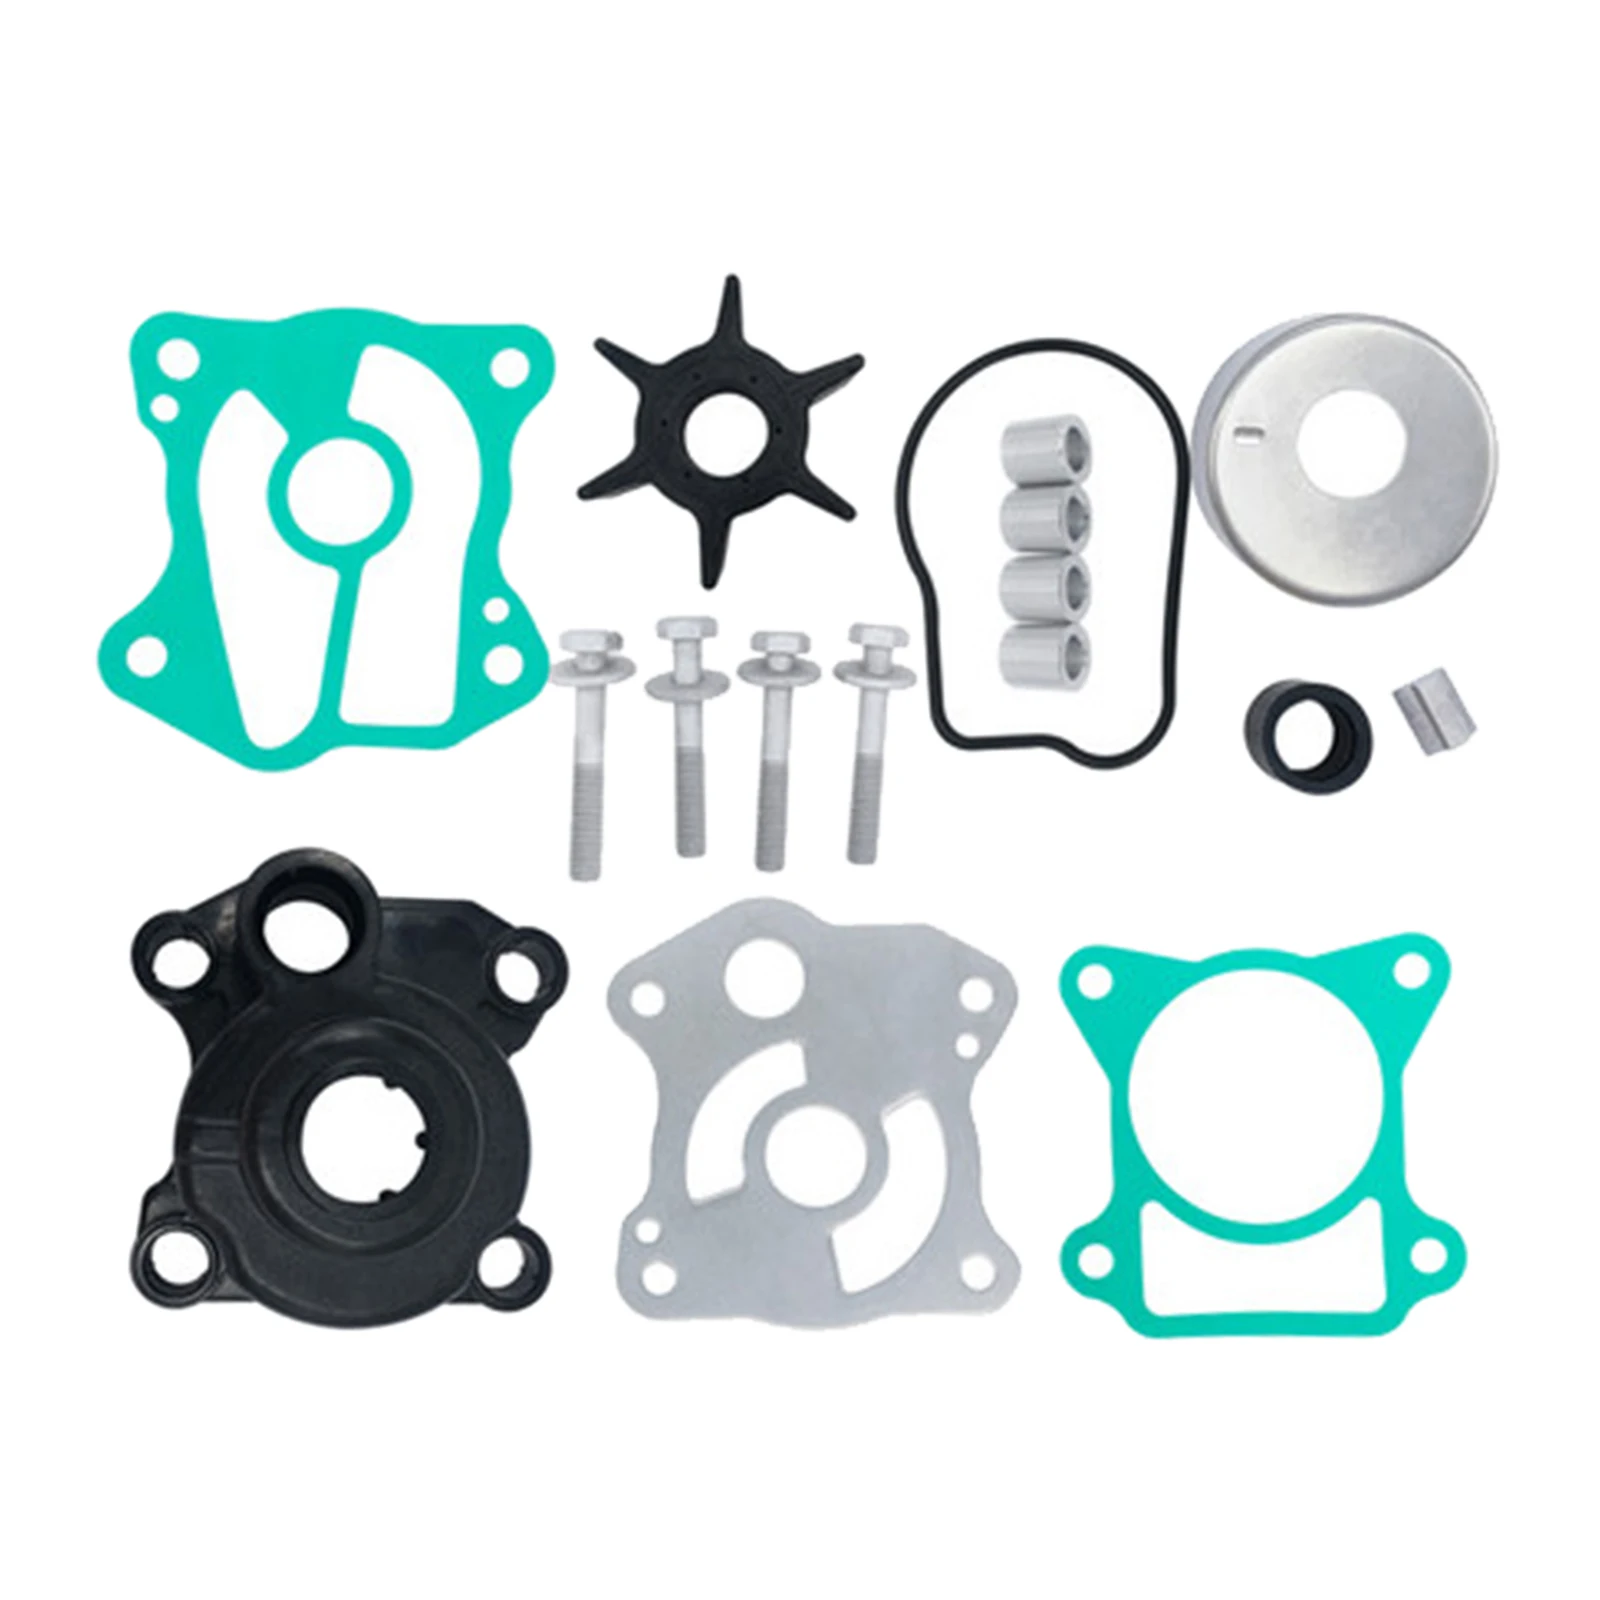 Water Pump Impeller Kit for Honda 06193-ZV5-020 06193-ZV5-010 06193-ZV5-000 Outboard Engines Replace